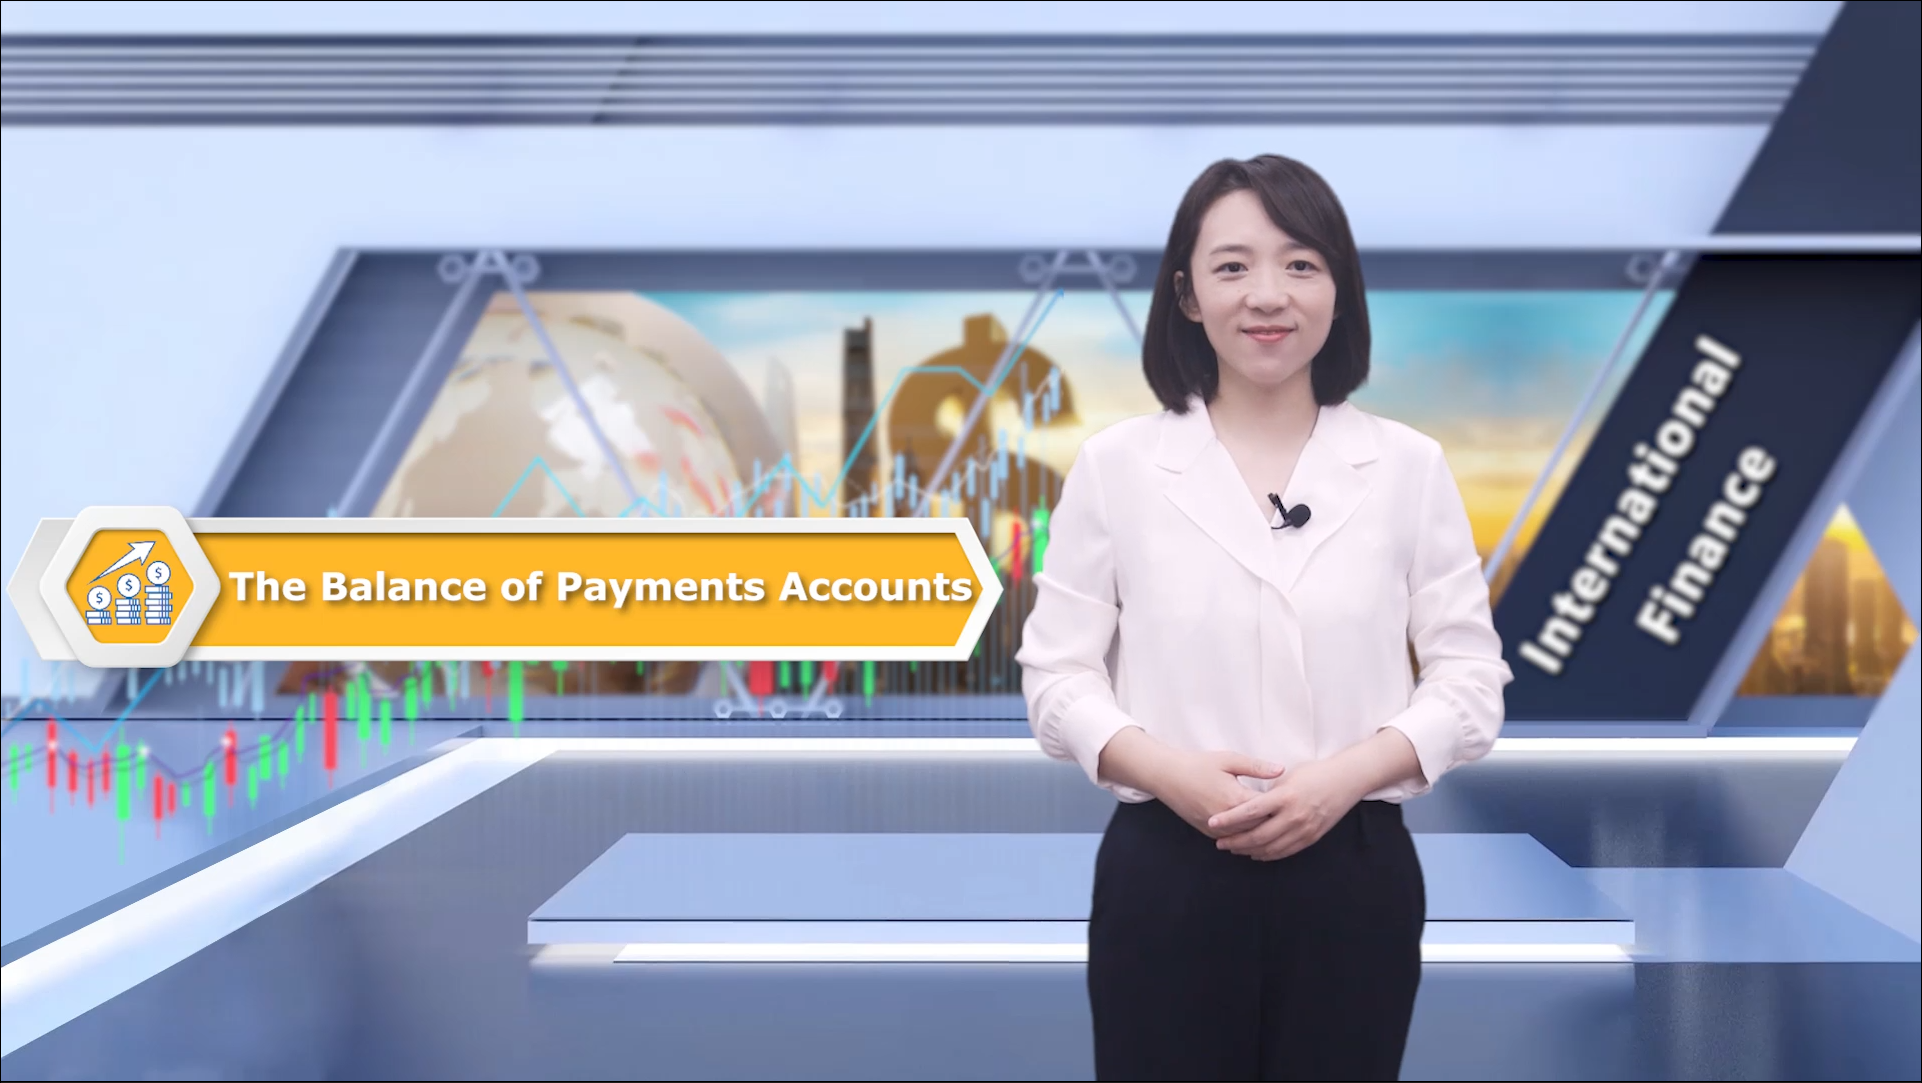 1.2 The Balance of Payments Accounts